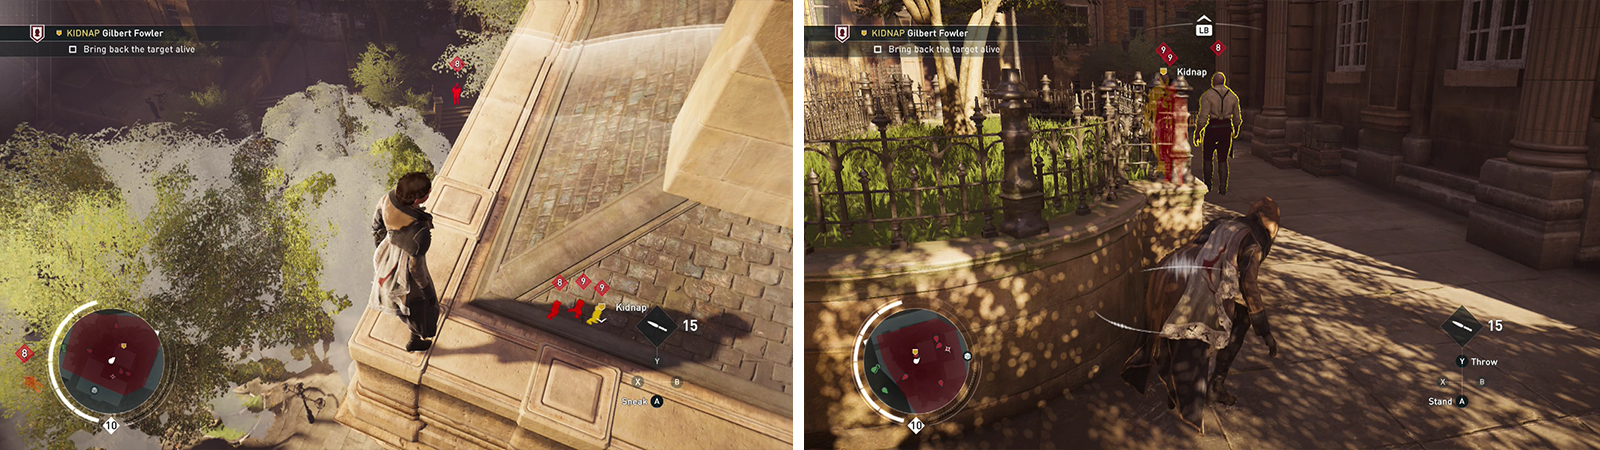 The target can be found at the base of the building(left). Sneak up behind and eliminate his bodyguards before grabbing the target (right).